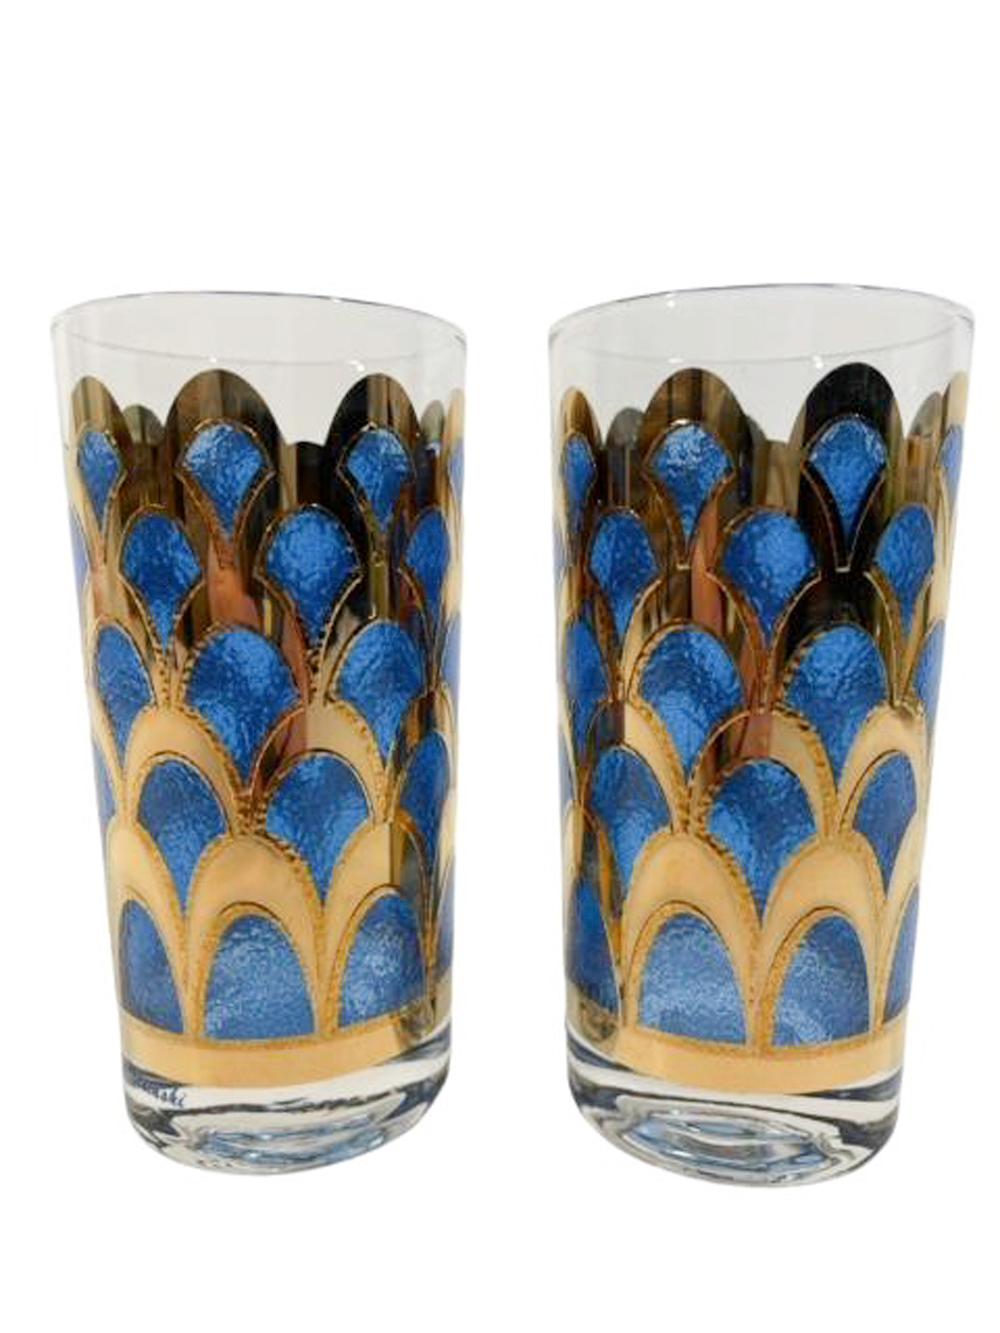 Set of six mid-century modern highball glasses designed by Irene Pasinski for Washington Glass. Decorated in deep blue translucent enamel framed in wide arches of raised 22k gold forming a fish scale like pattern.